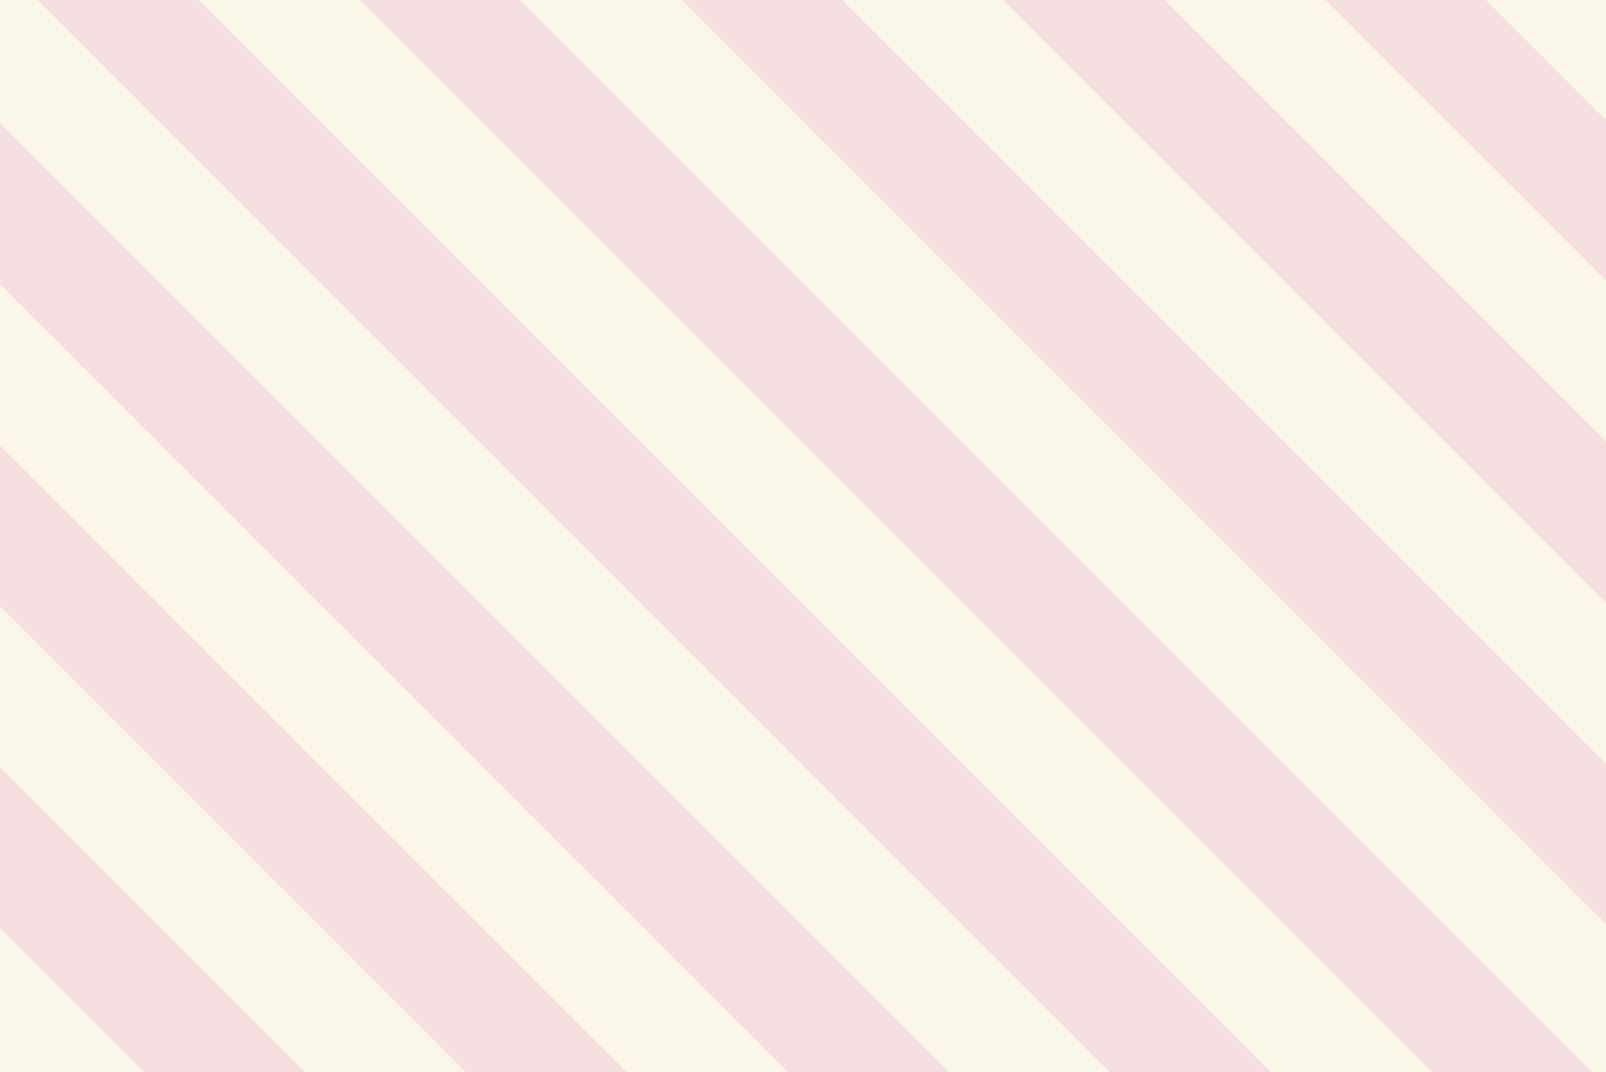 Pastel pink and white striped background